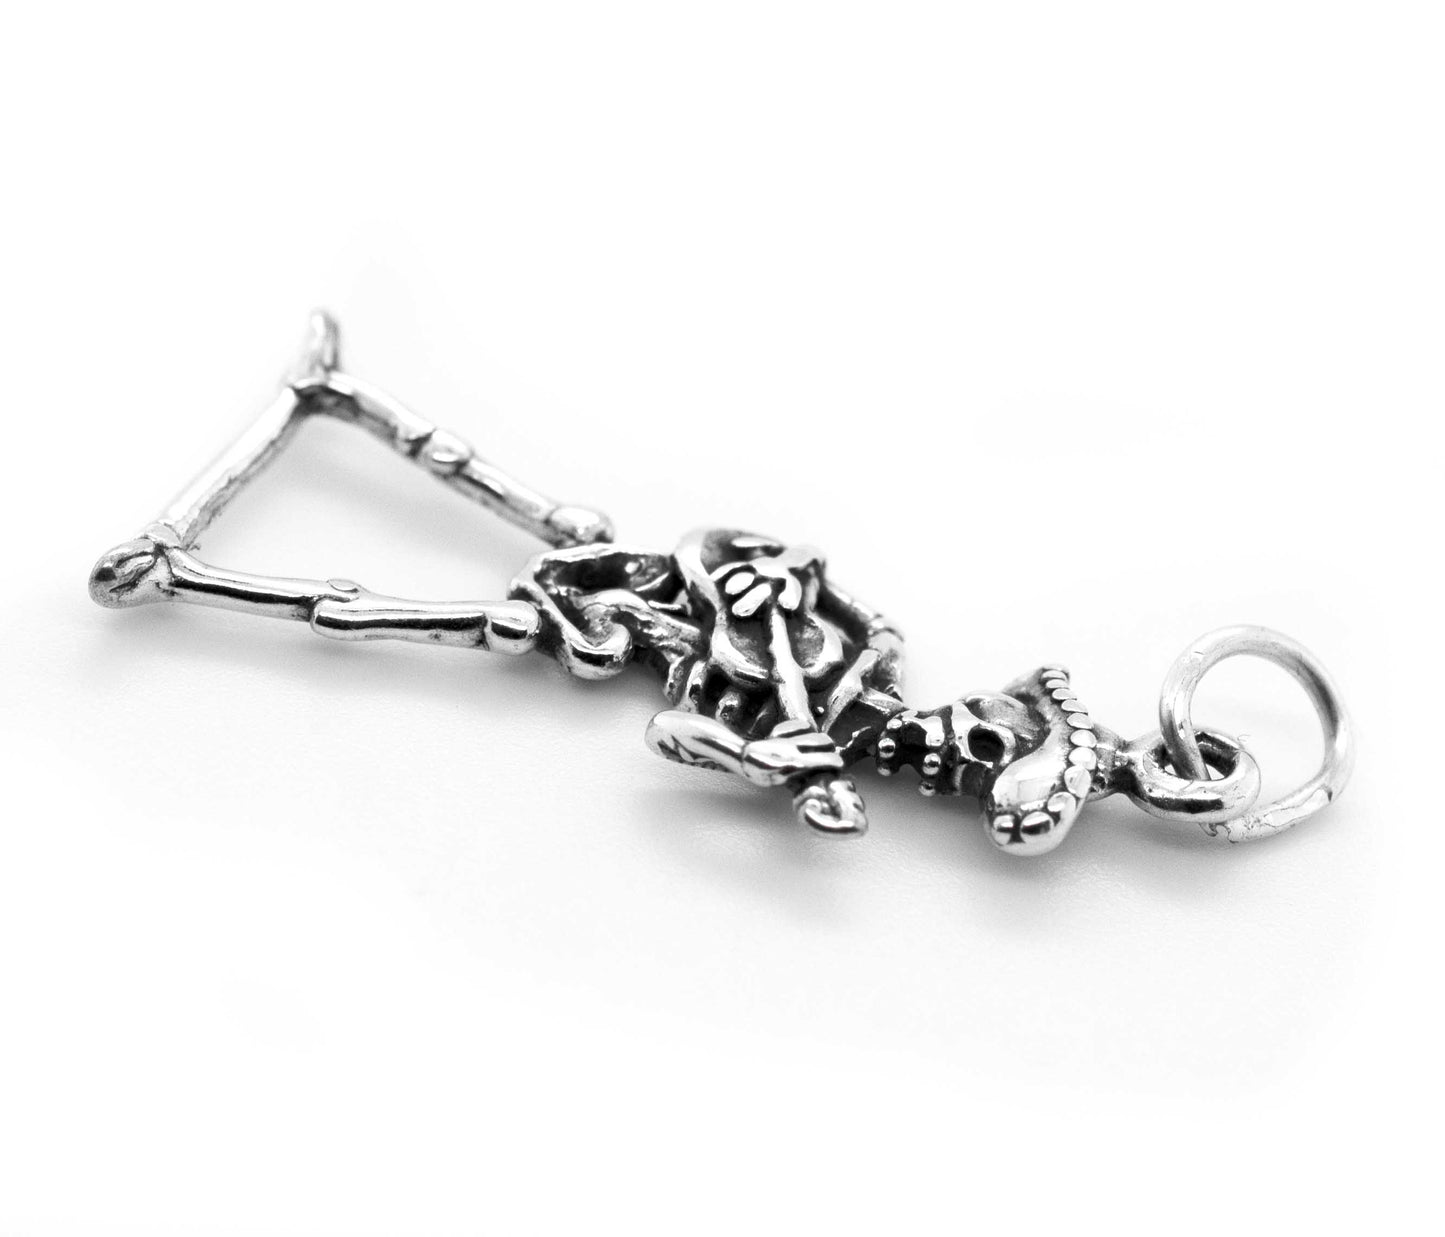 A Super Silver Mariachi Skeleton with Guitar Charm, perfect for fans of Day of the Dead or Día De Los Muertos.